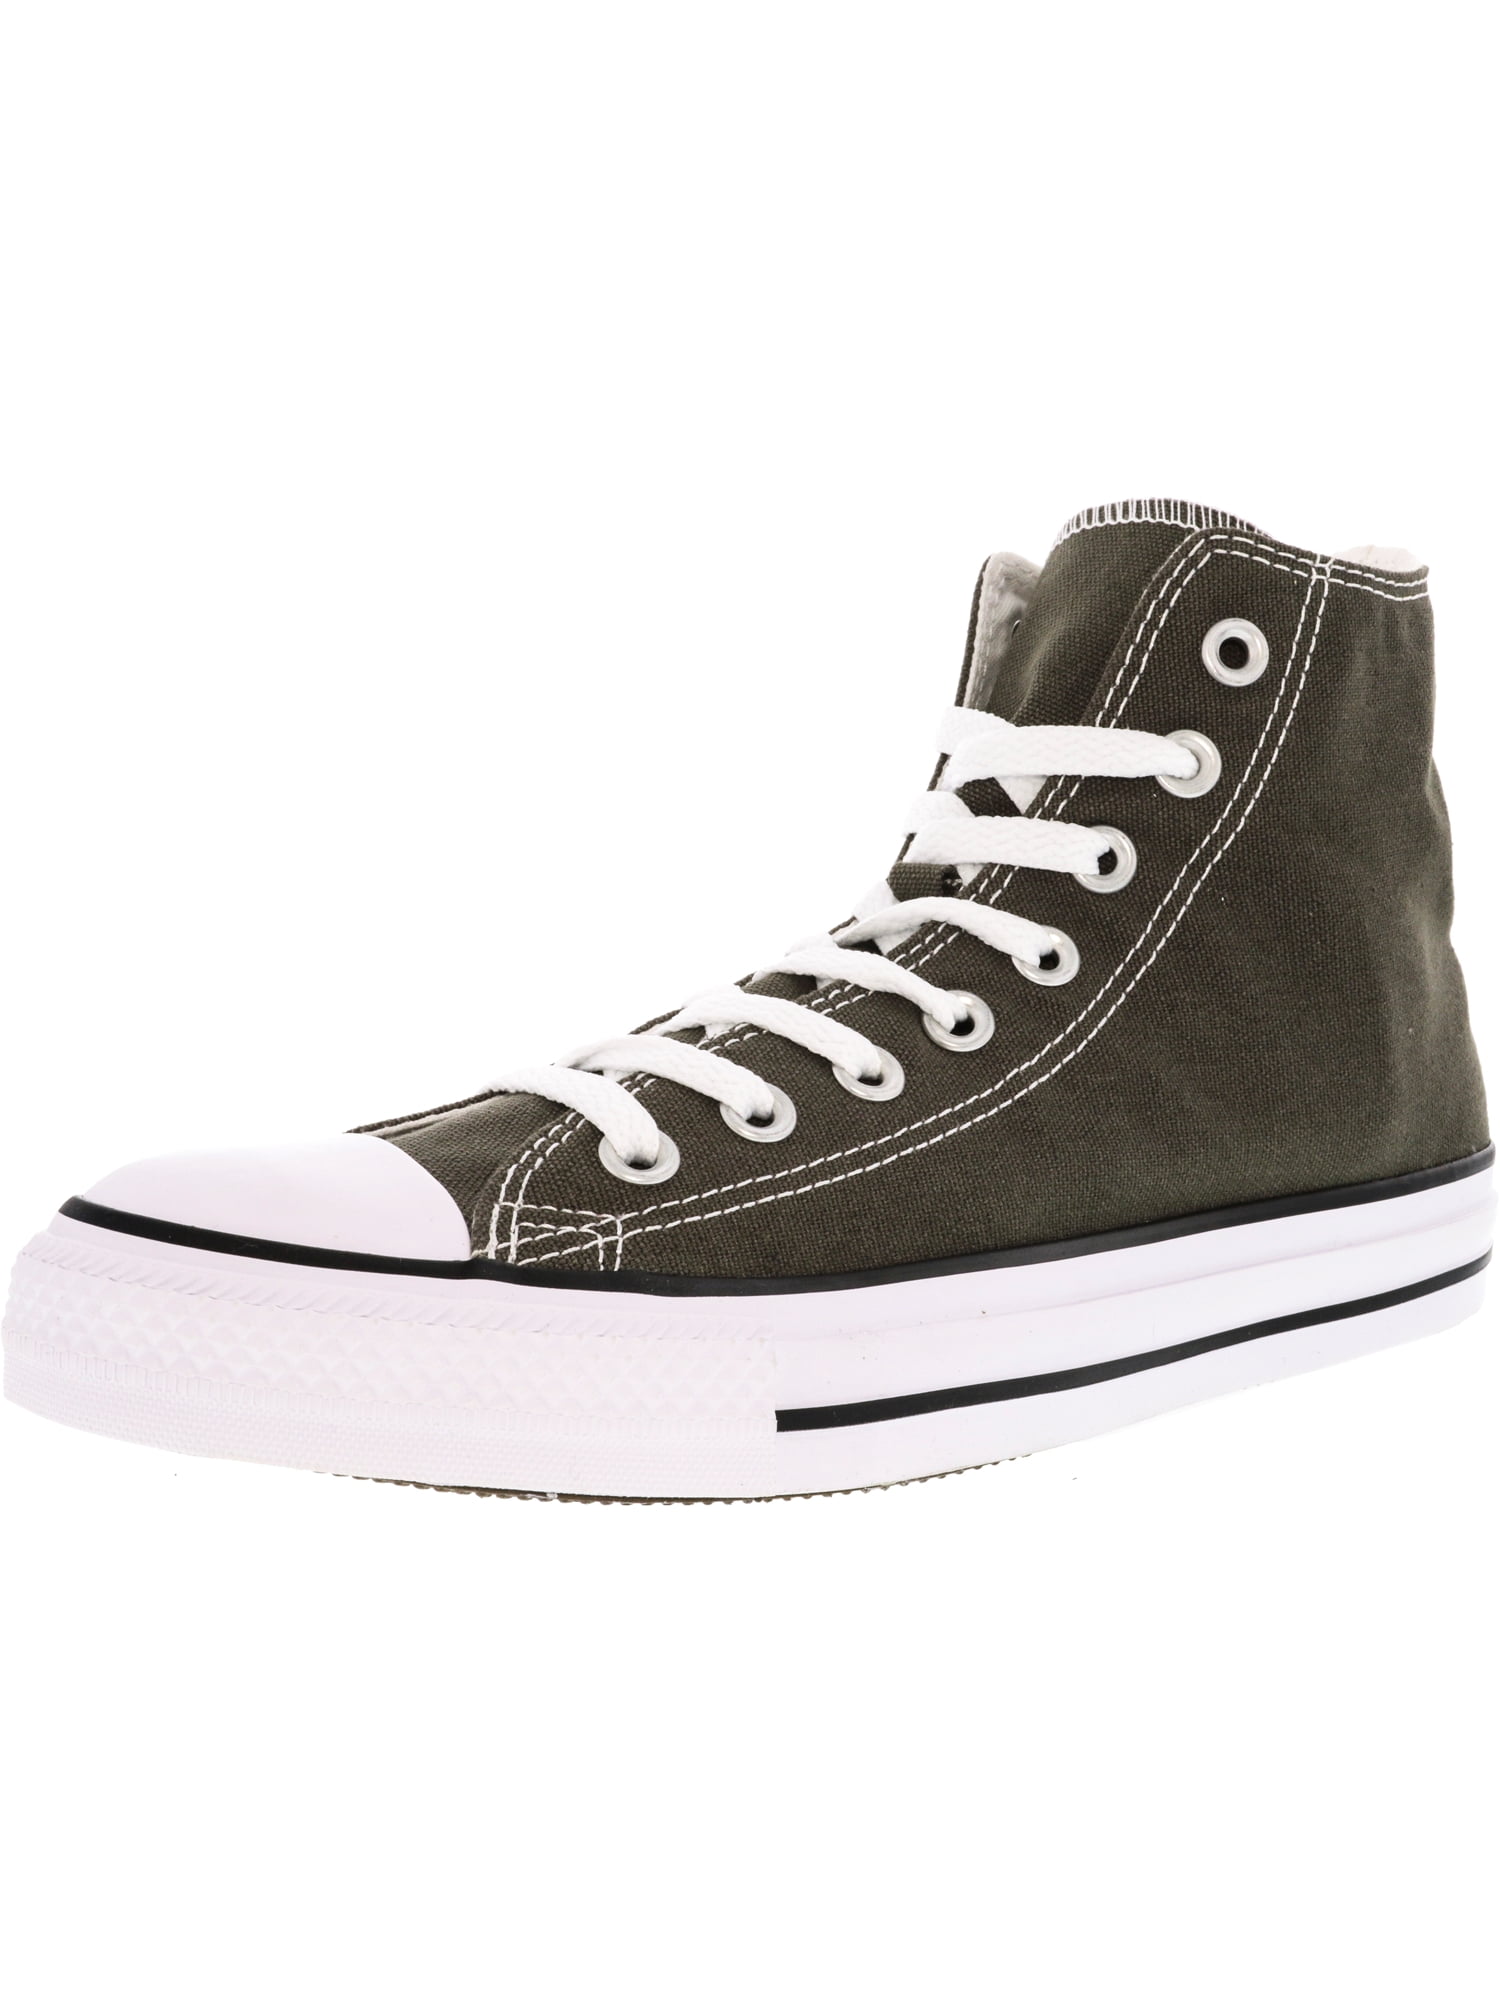 Boutique Chucks Suede Sneakers Shoes Women New Charcoal lace up stitch detail 